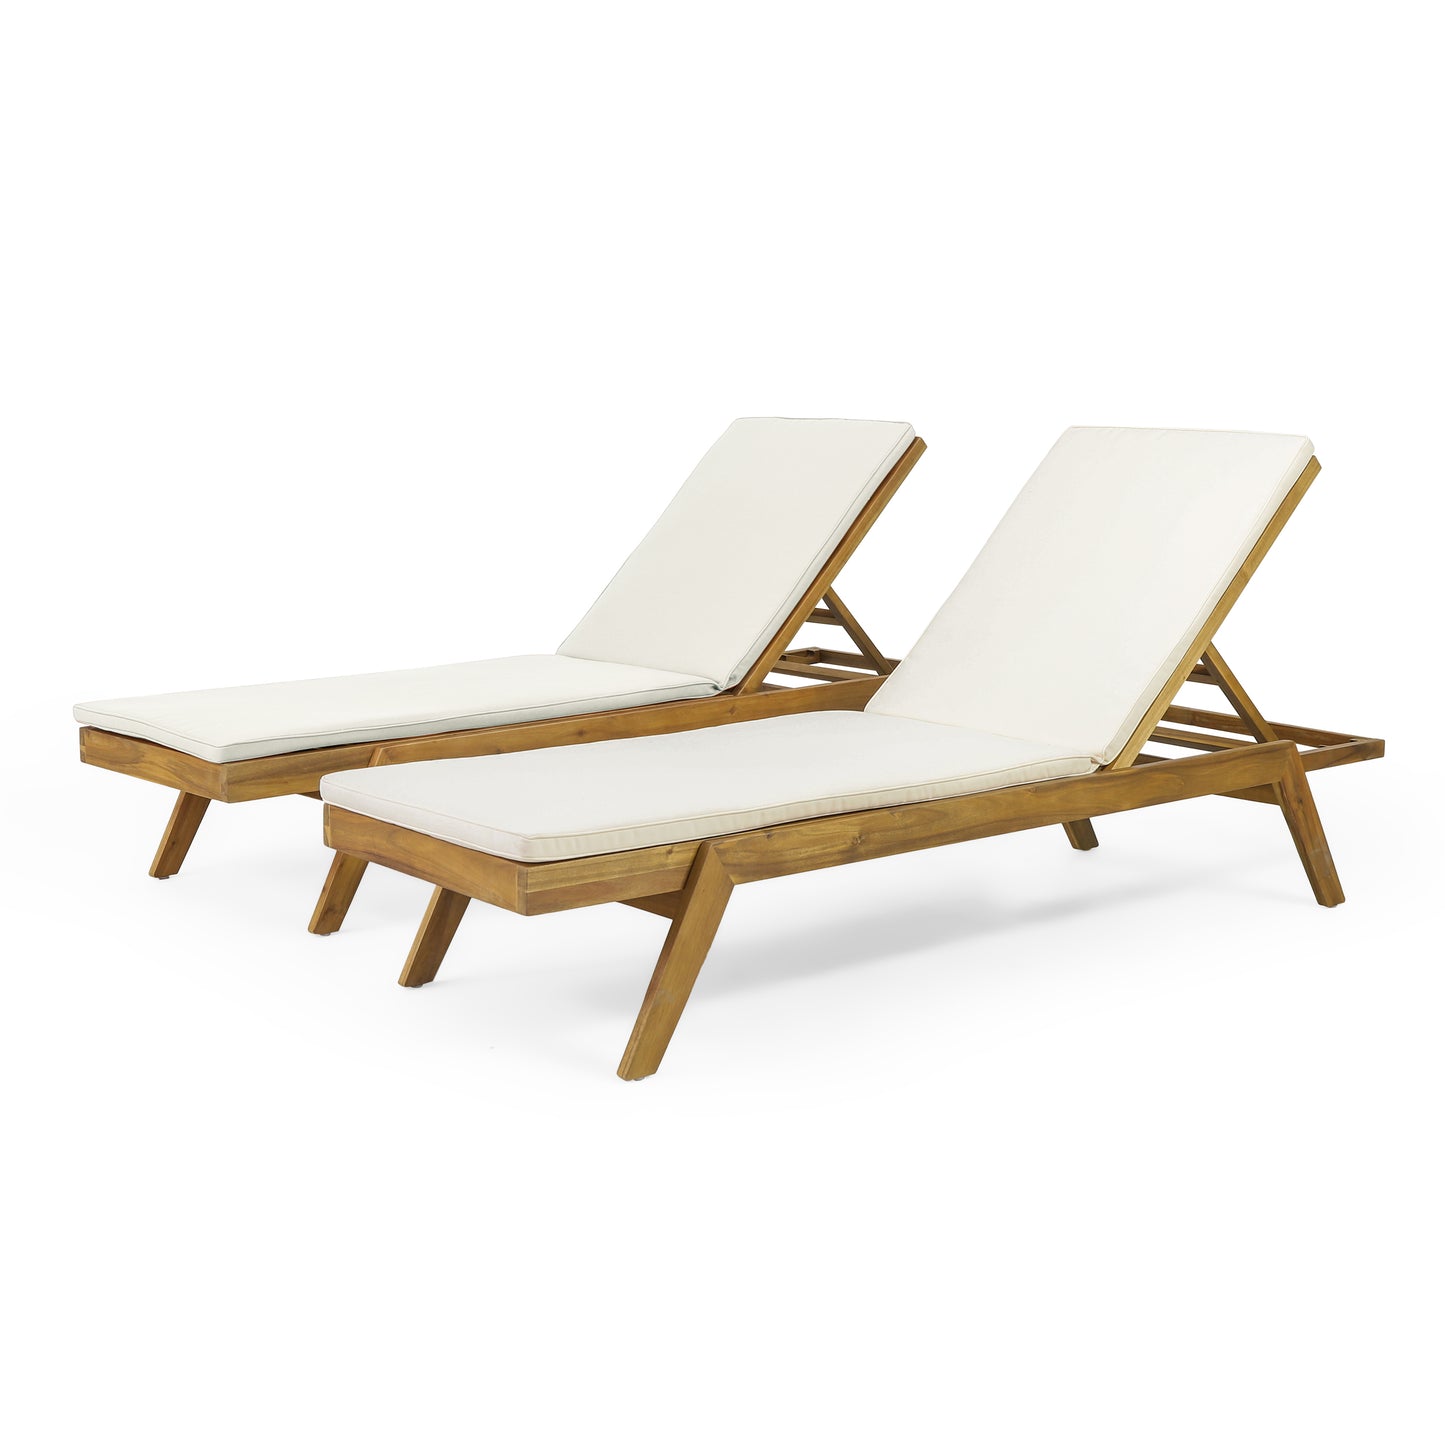 Larimore Outdoor Acacia Wood Chaise Lounge with Water Resistant Cushions, Set of 2